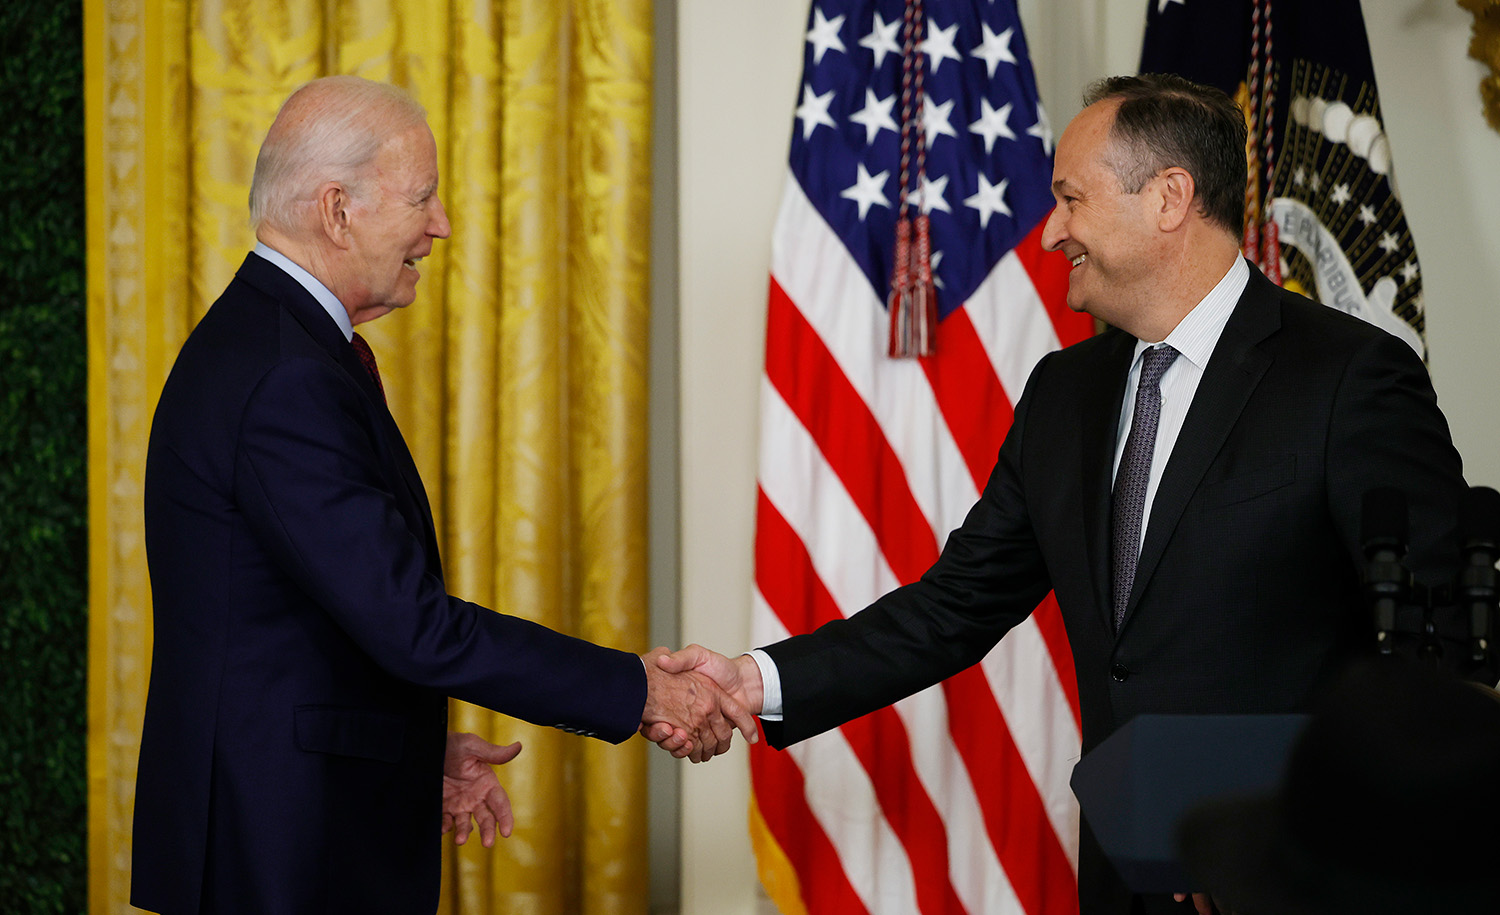 
President Joe Biden and second gentleman Doug Emhoff during a celebration marking Jewish American Heritage Month in the East Room of the White House on May 16, 2023 in Washington, DC. Chip Somodevilla/Getty Images.






